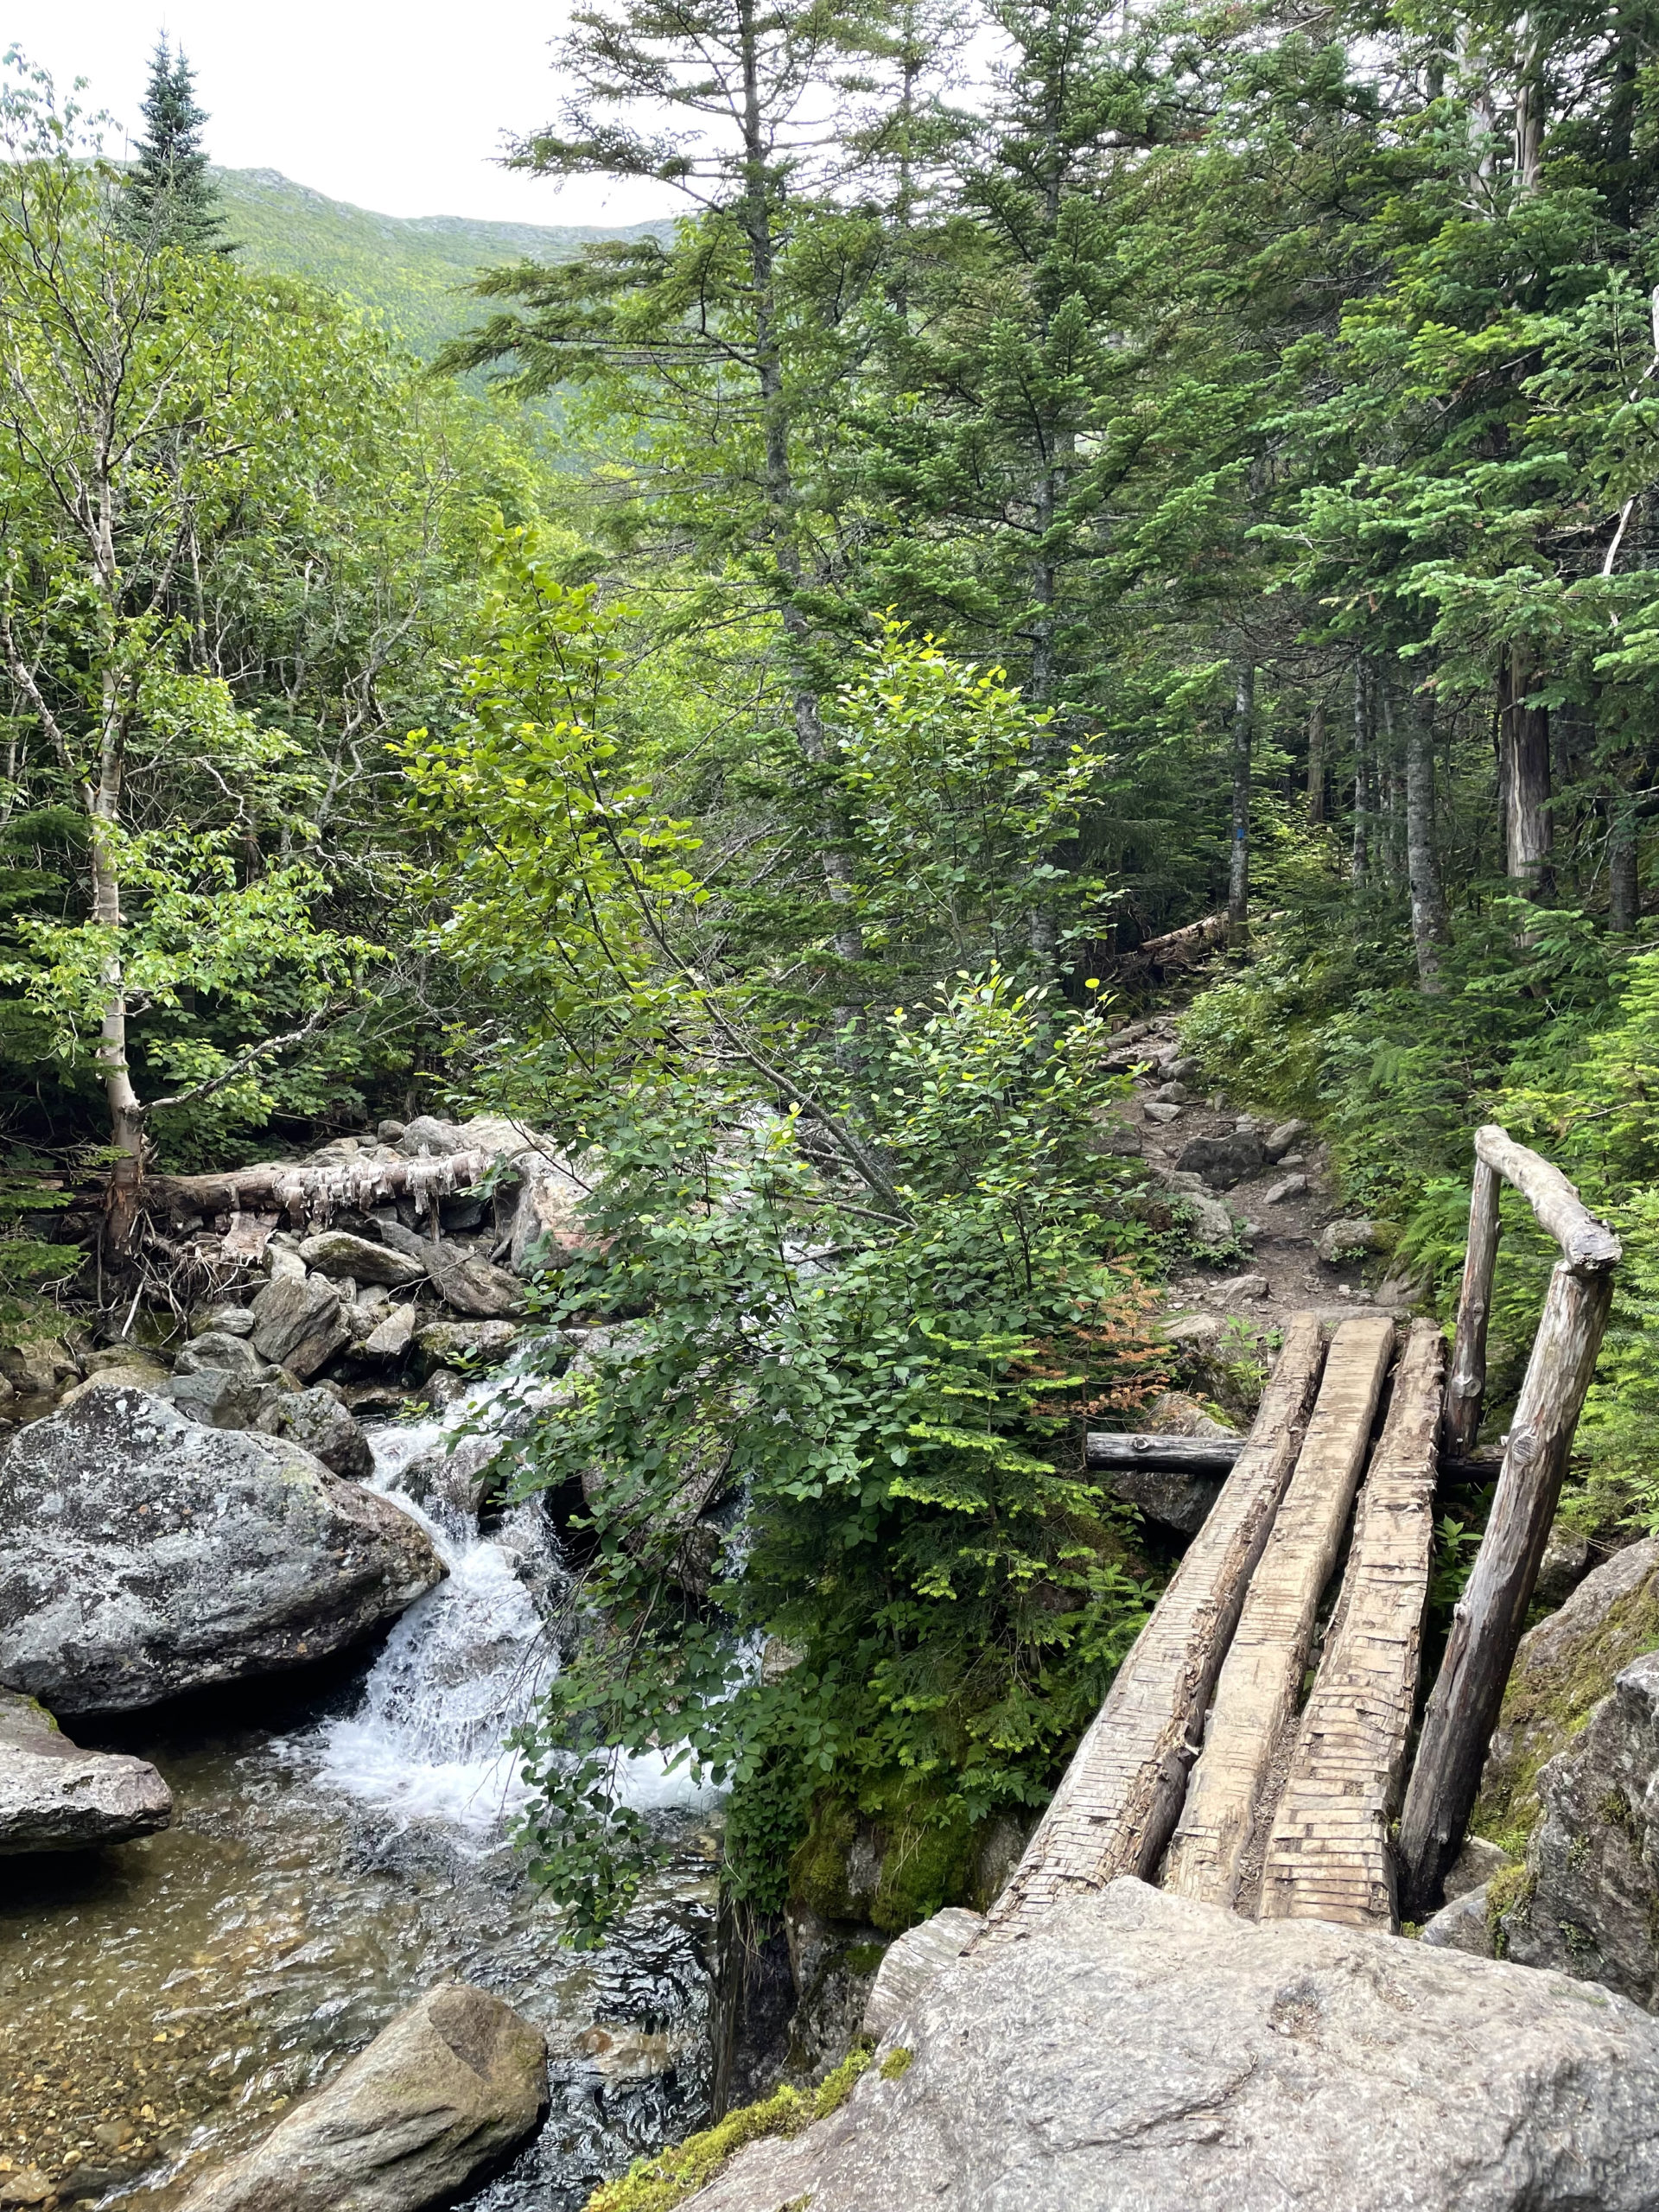 Bridge over the trail, seen while hiking Mt. Pierce and Mt. Jackson in the White Mountains National Forest, New Hampshire